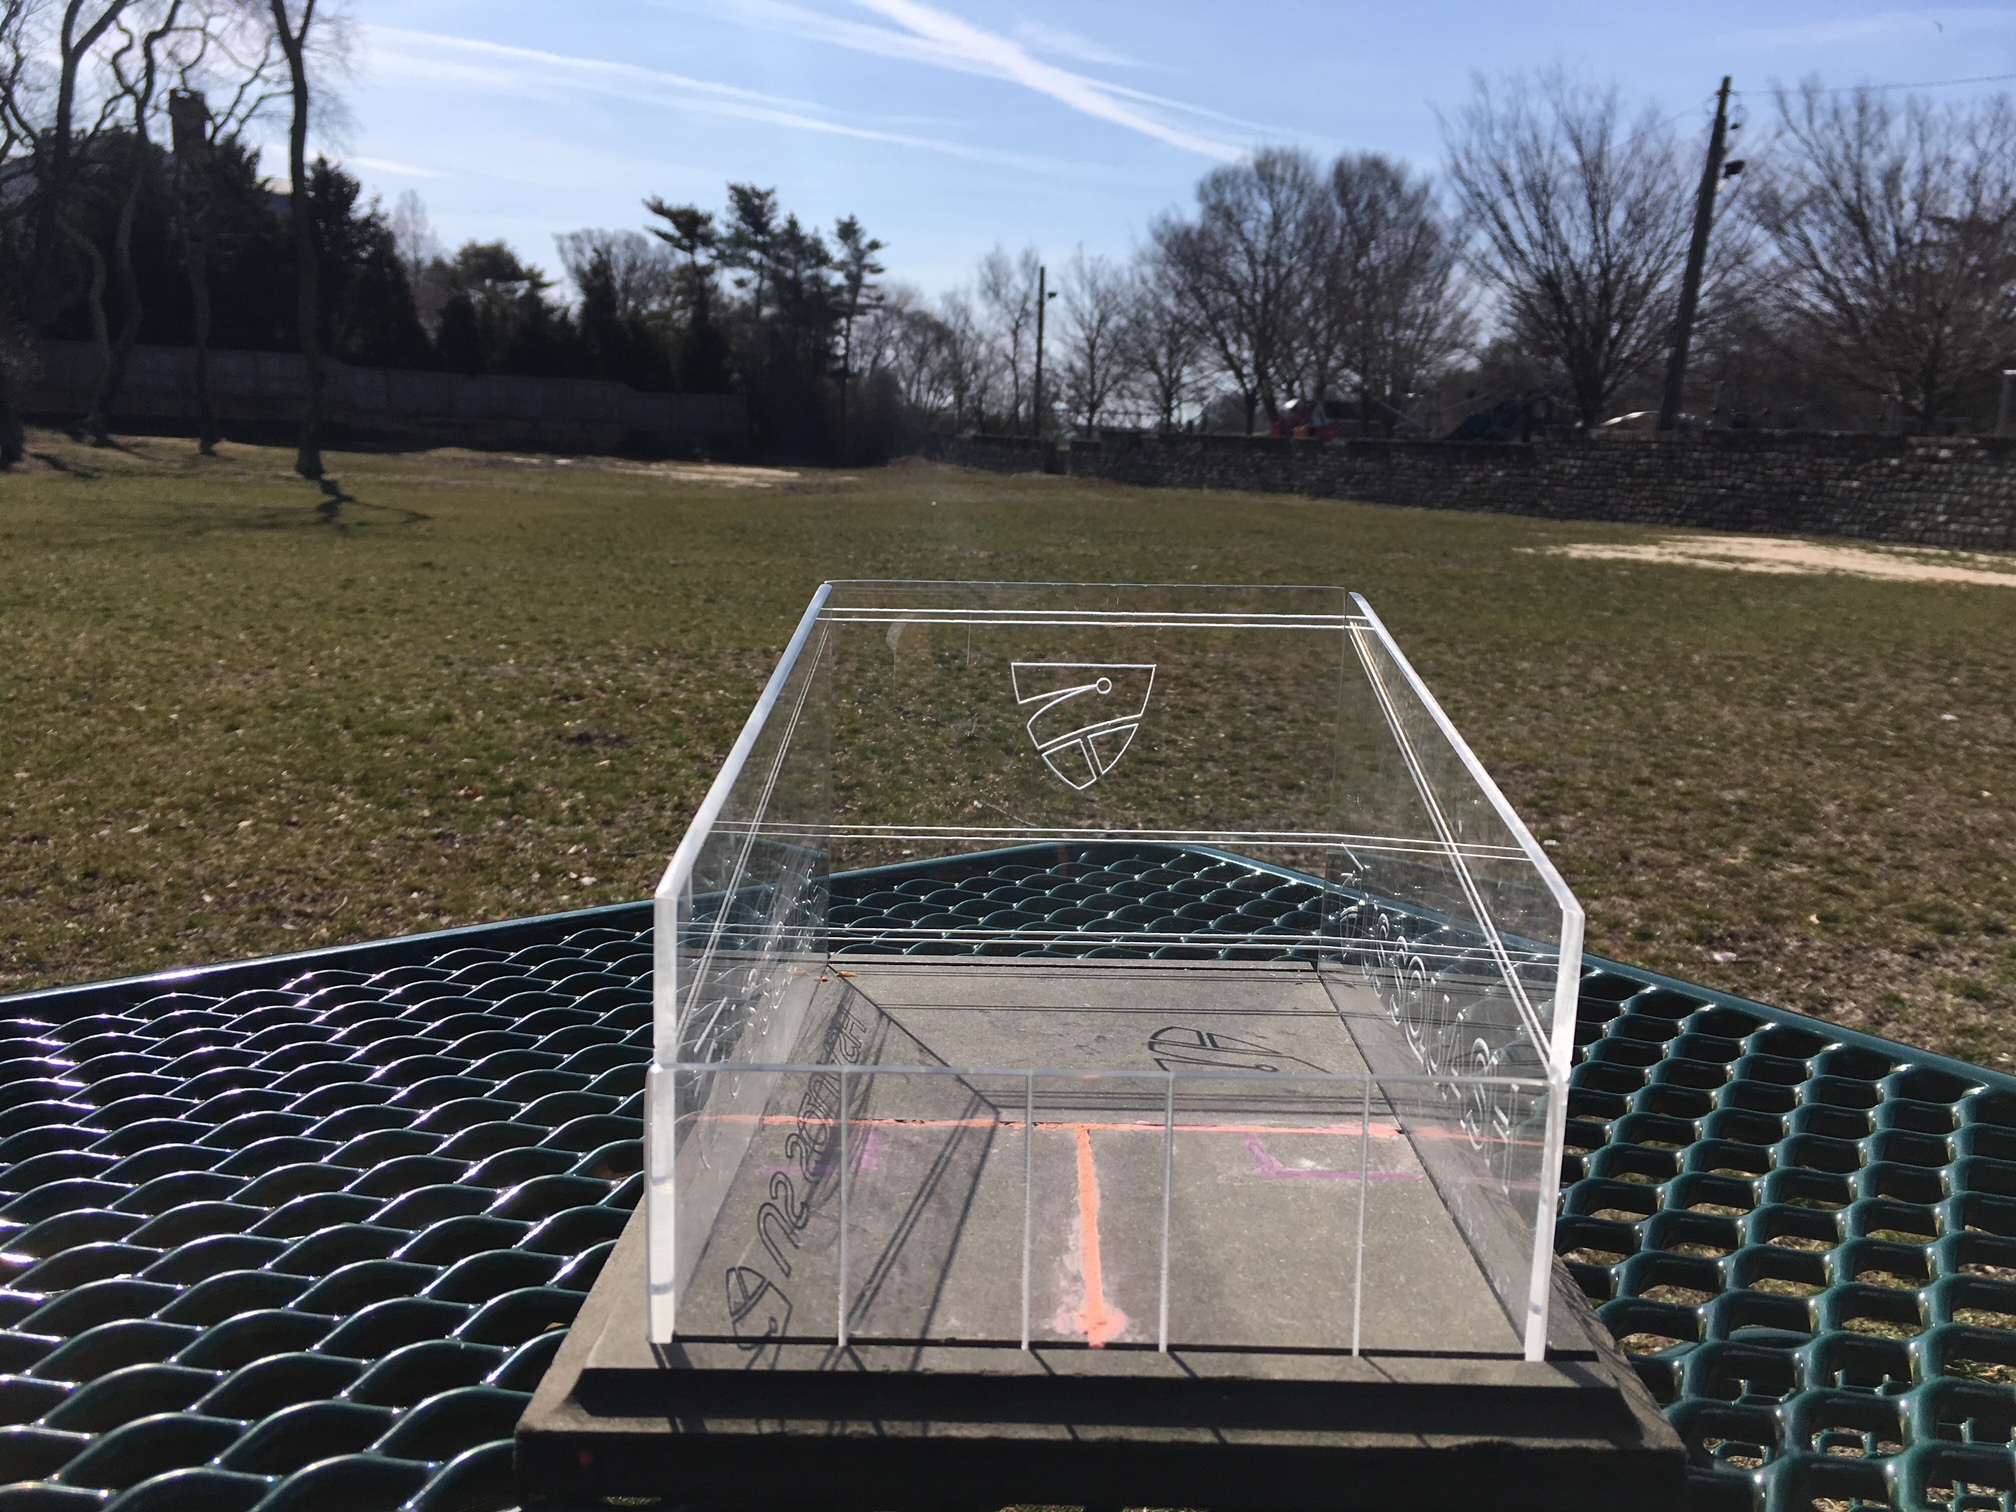 Another view of the miniature replica of the squash court a local group wants to install at Doscher Park in Southampton Village. KITTY MERRILL